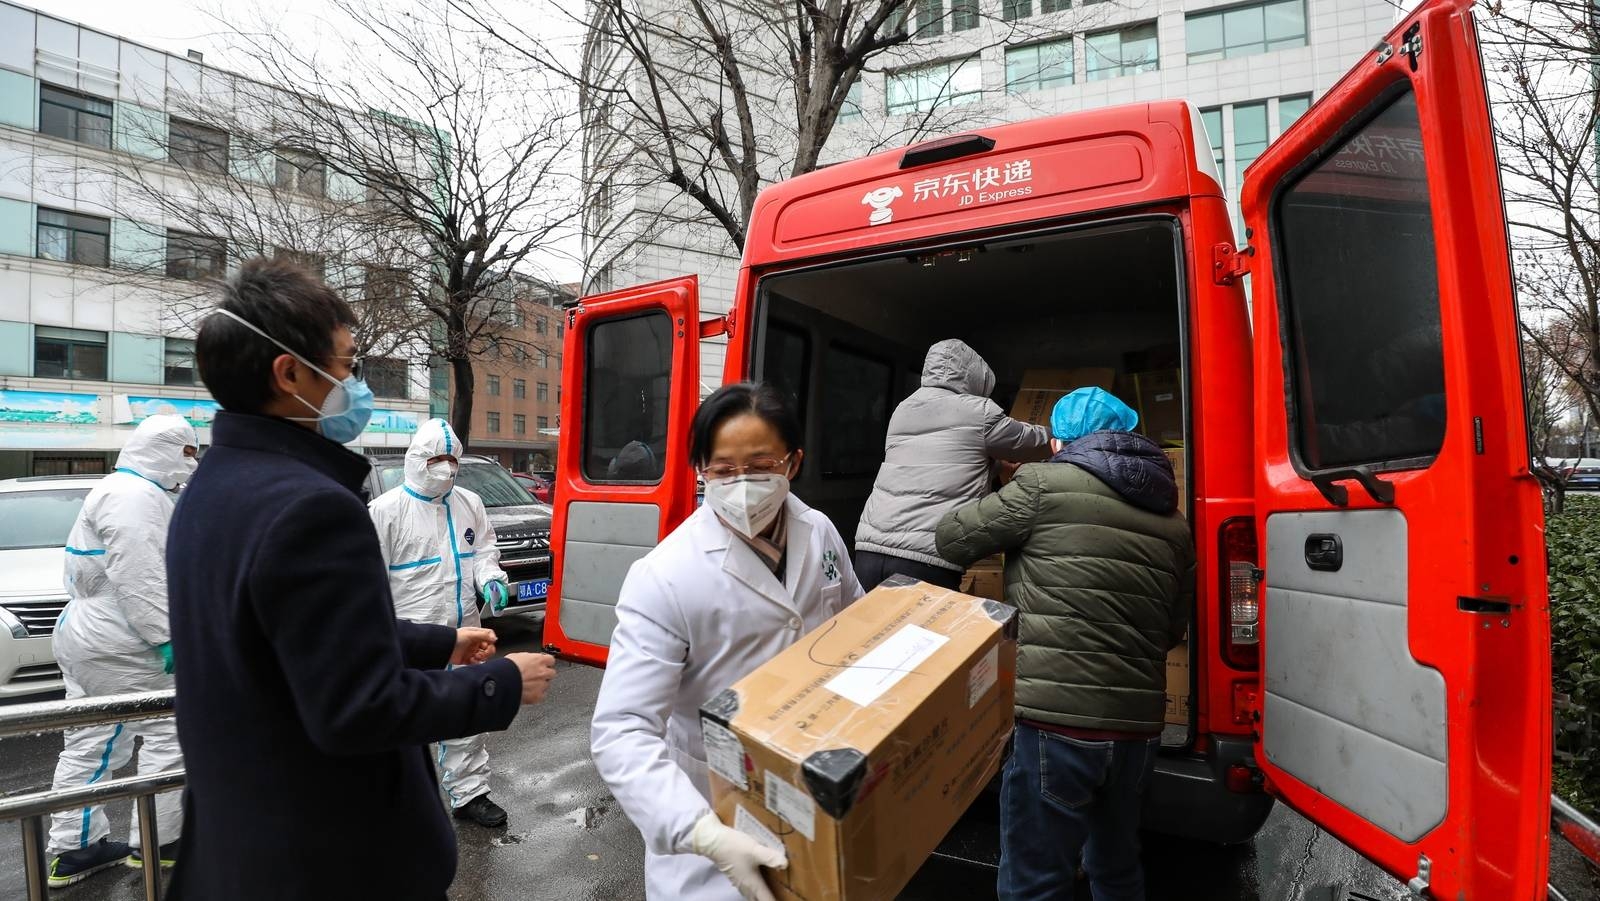 The virus has overwhelmed China's hospitals prompting authorities to send for medical reinforcements. — AFP